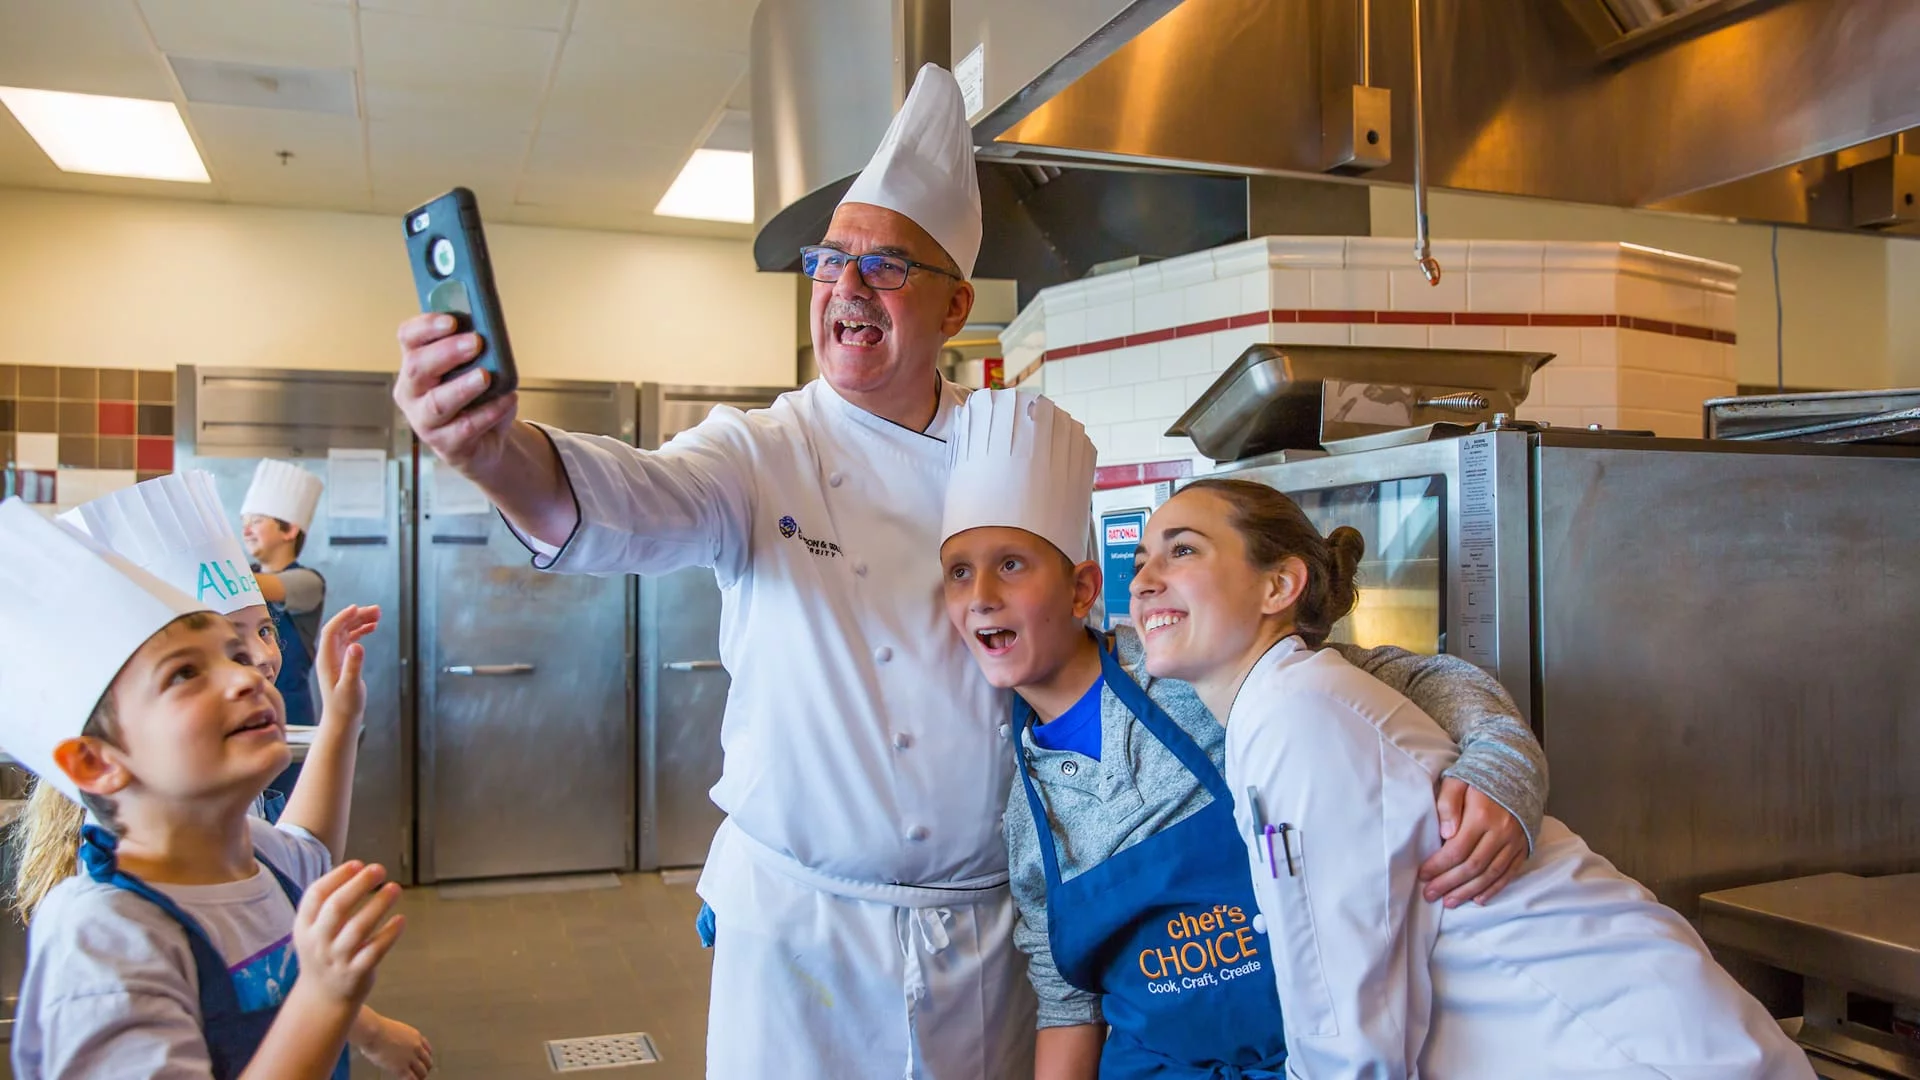 Chef Dion takes a selfie with campers.